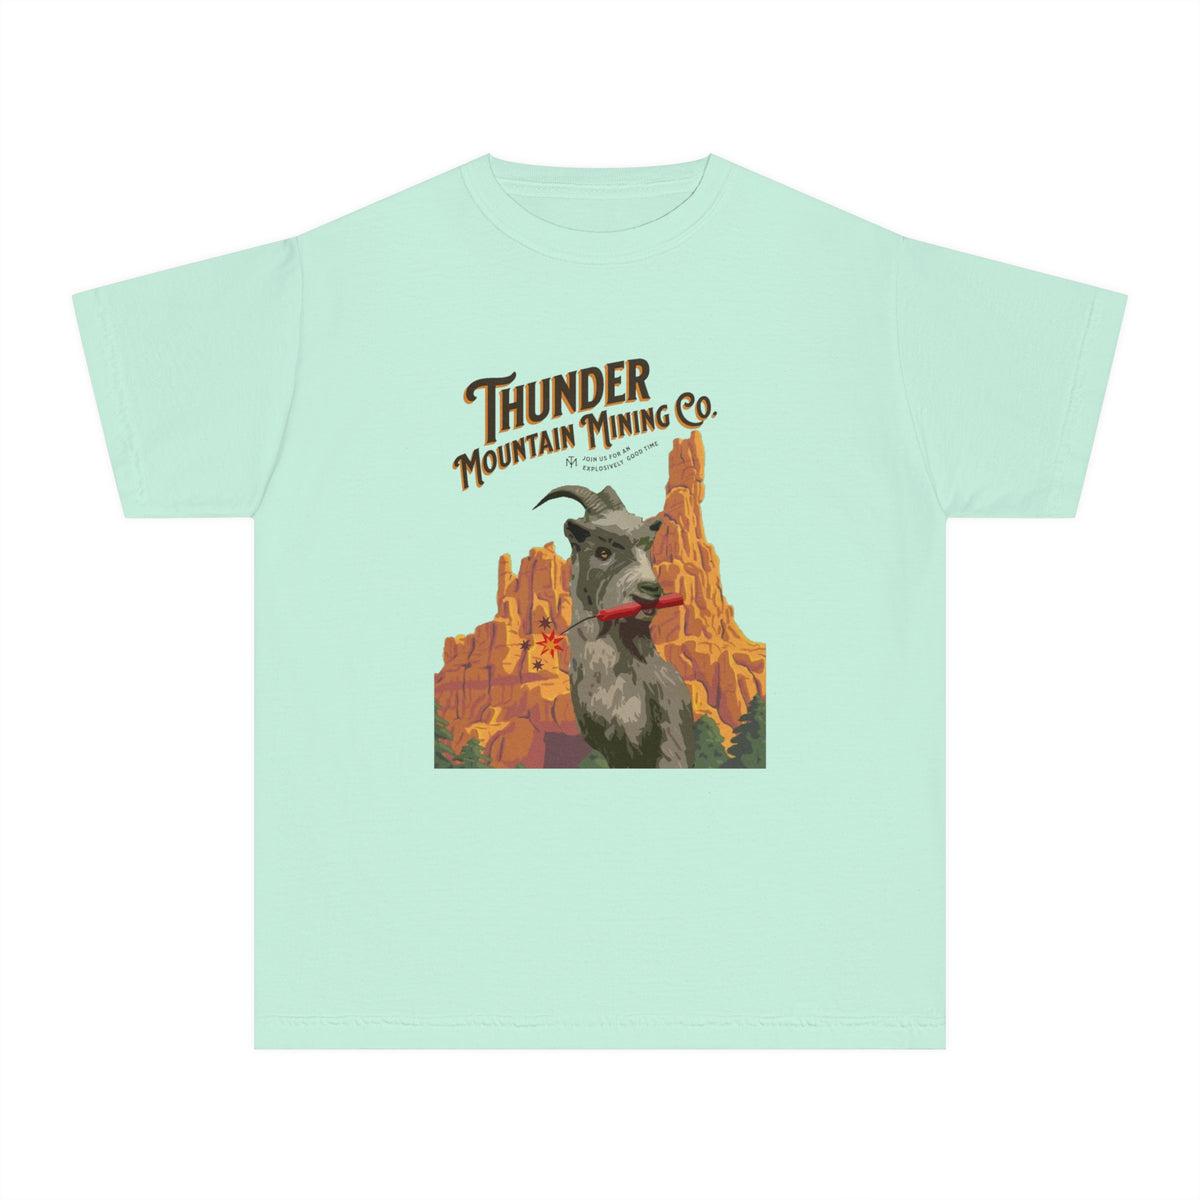 Thunder Mountain Mining Co. Comfort Colors Youth Midweight Tee